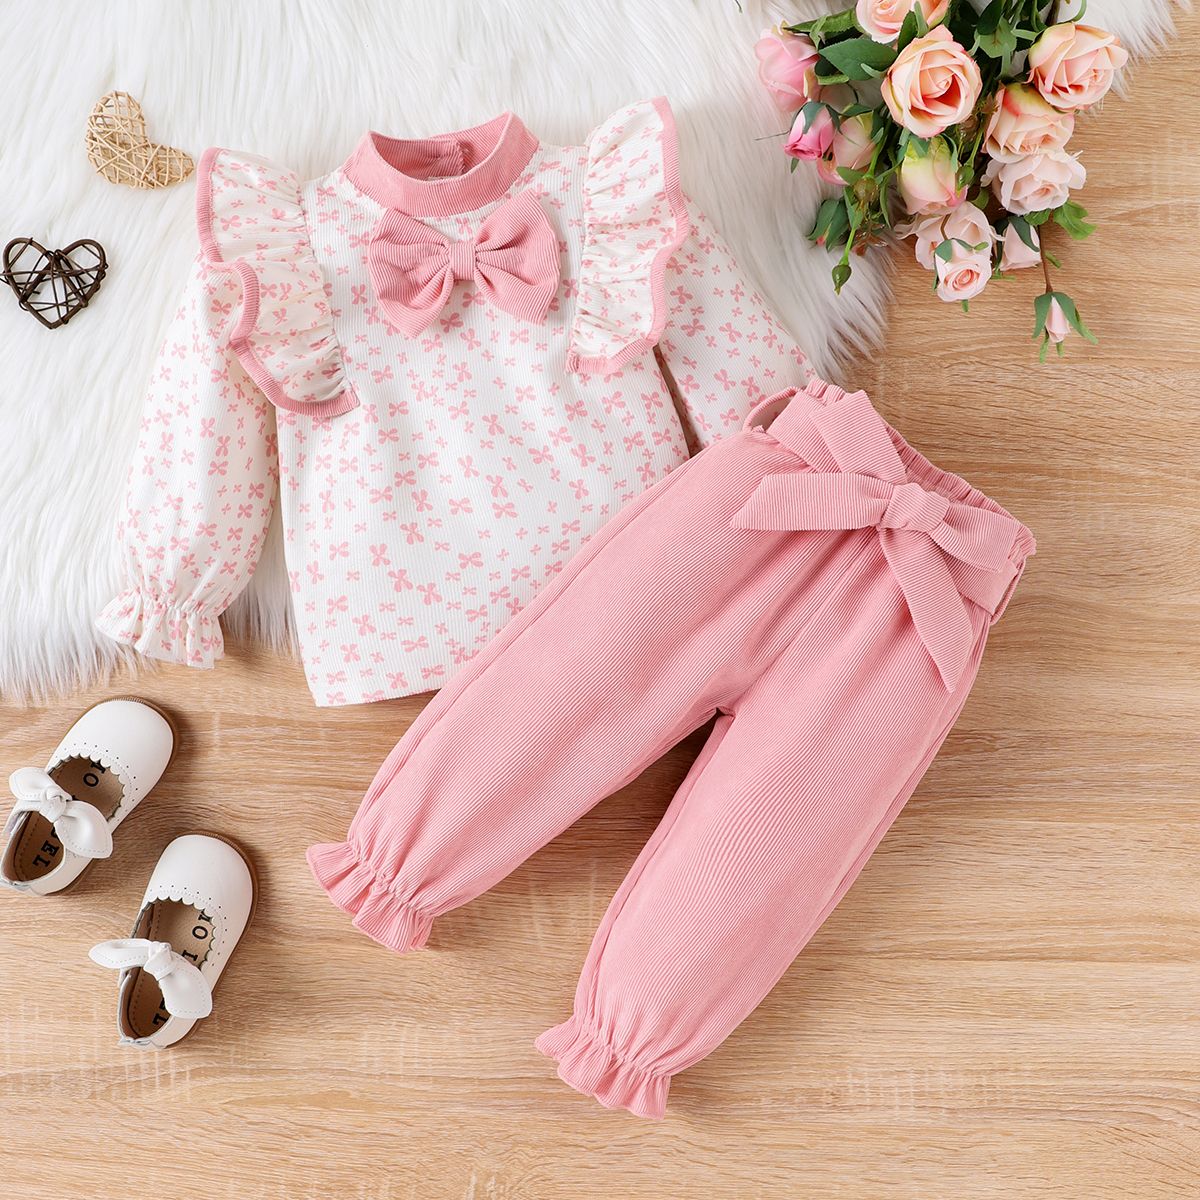 3-Piece Baby Girl Ruffle Edge And Flower Pattern Bowknot Design Set